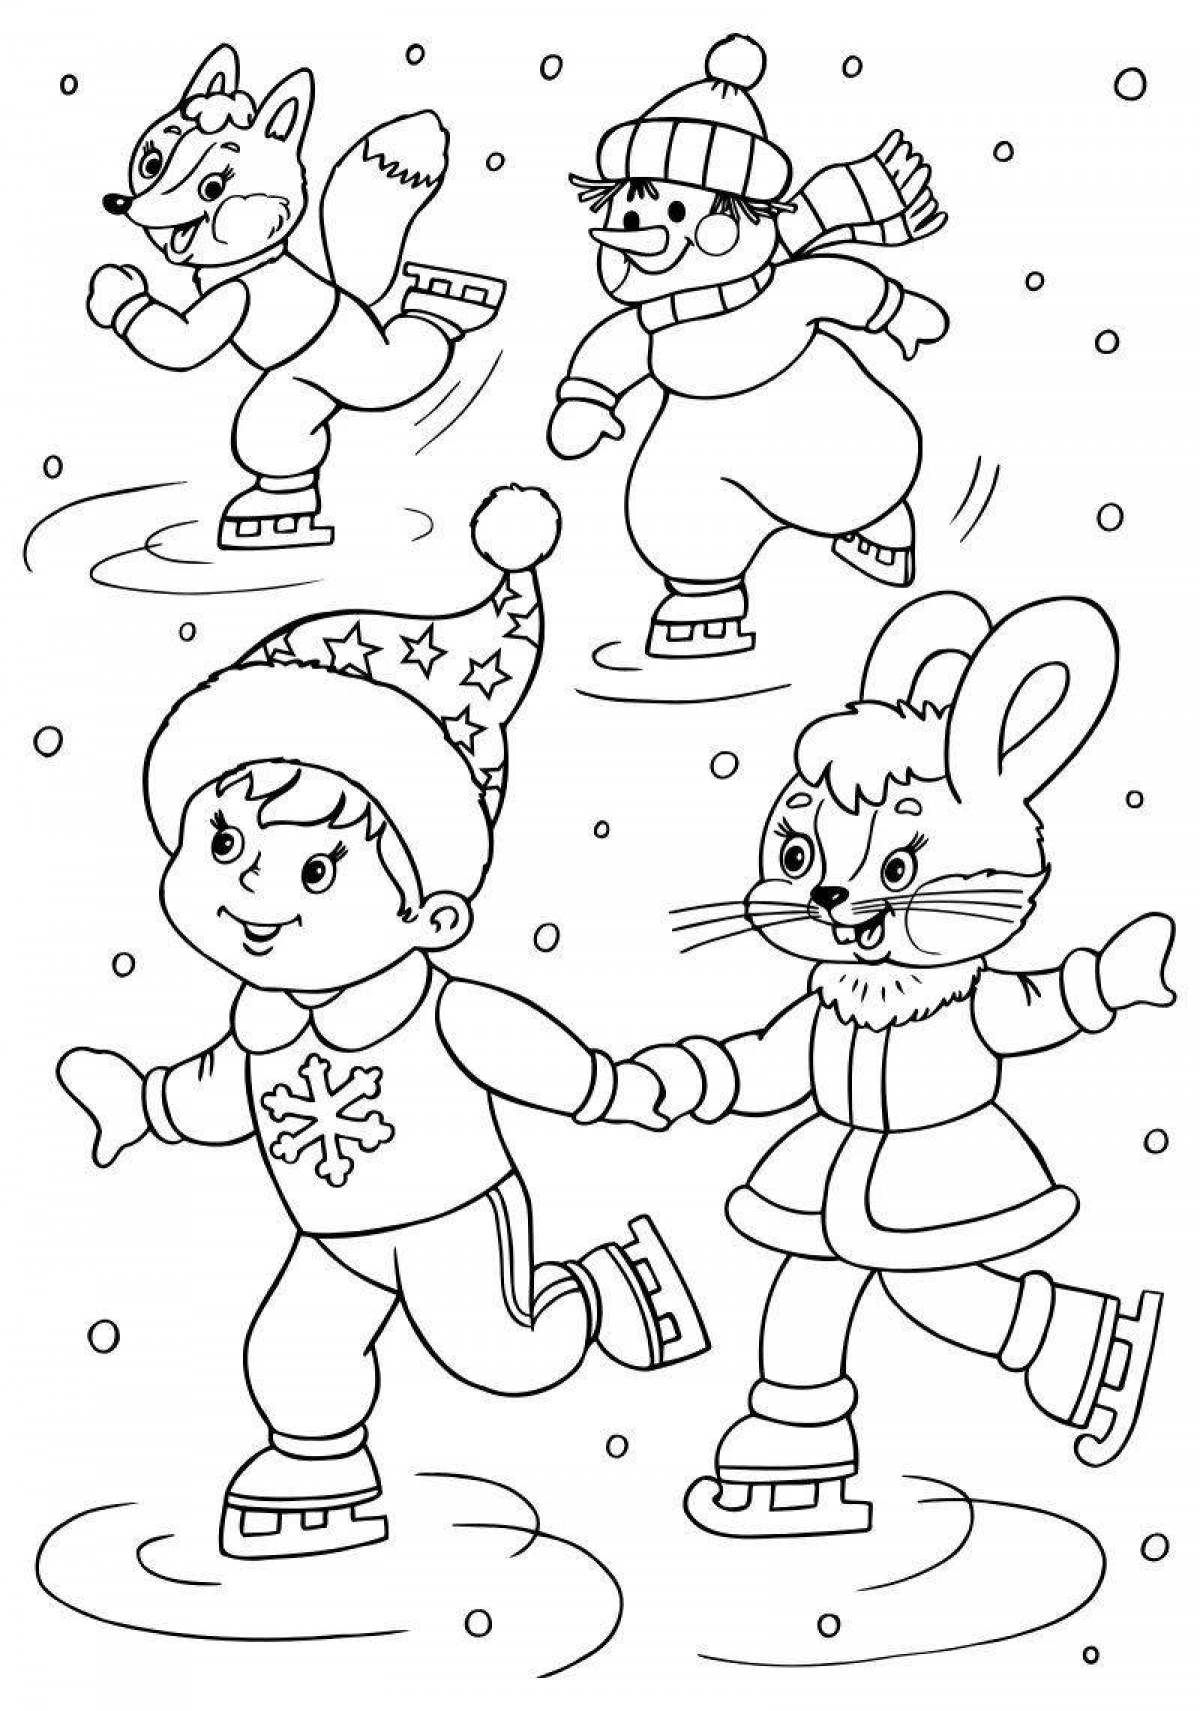 Frosty winter coloring for pre-k